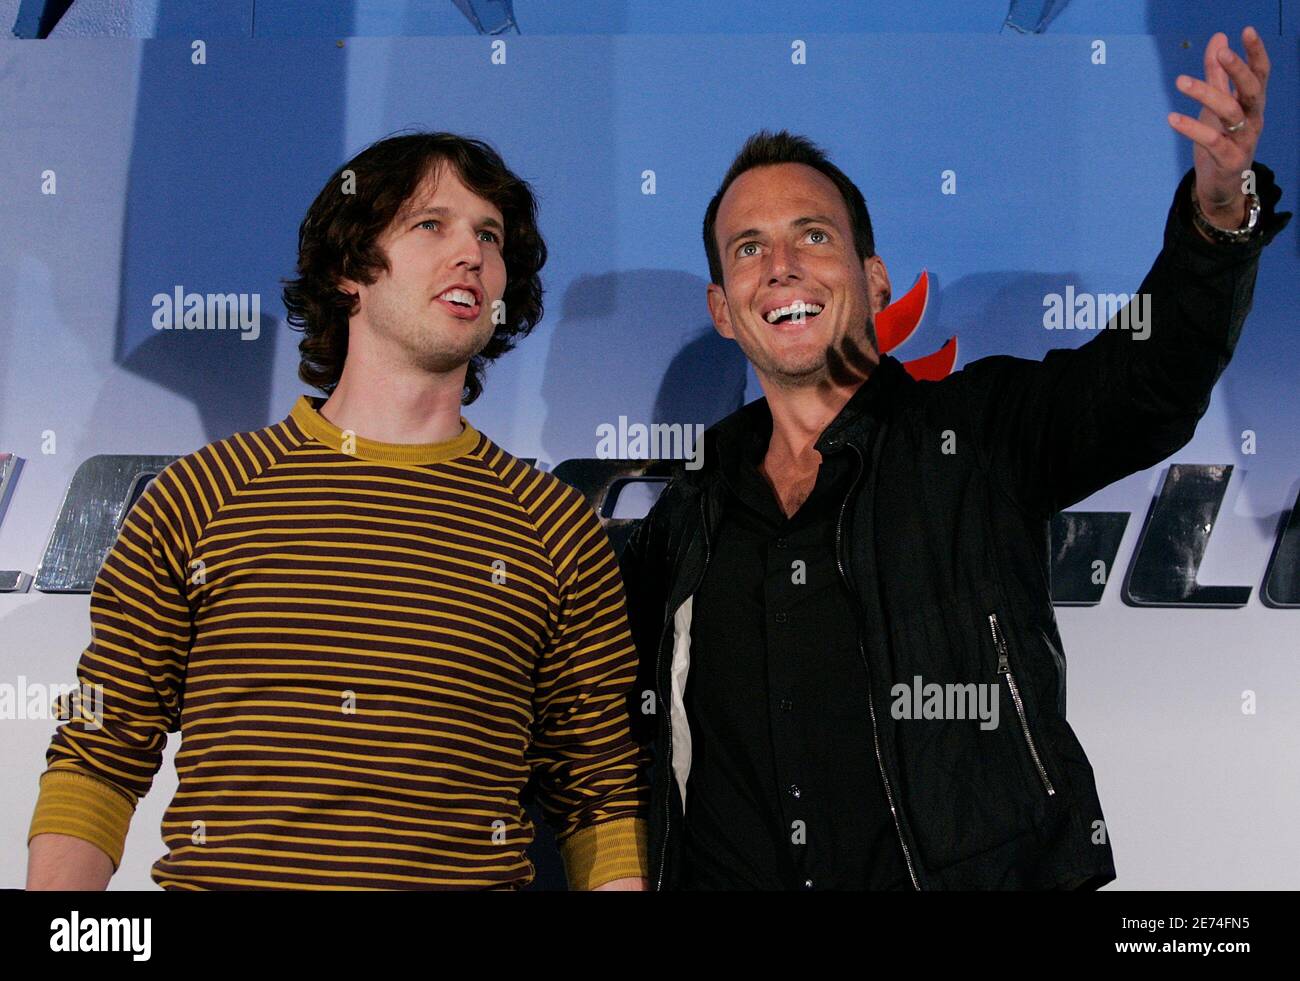 Actors Jon Heder (L) and Will Arnett joke around at a media opportunity at an ice skating rink to promote their film "Blades of Glory" in Sydney June 6, 2007.         REUTERS/Tim Wimborne     (AUSTRALIA) Stock Photo